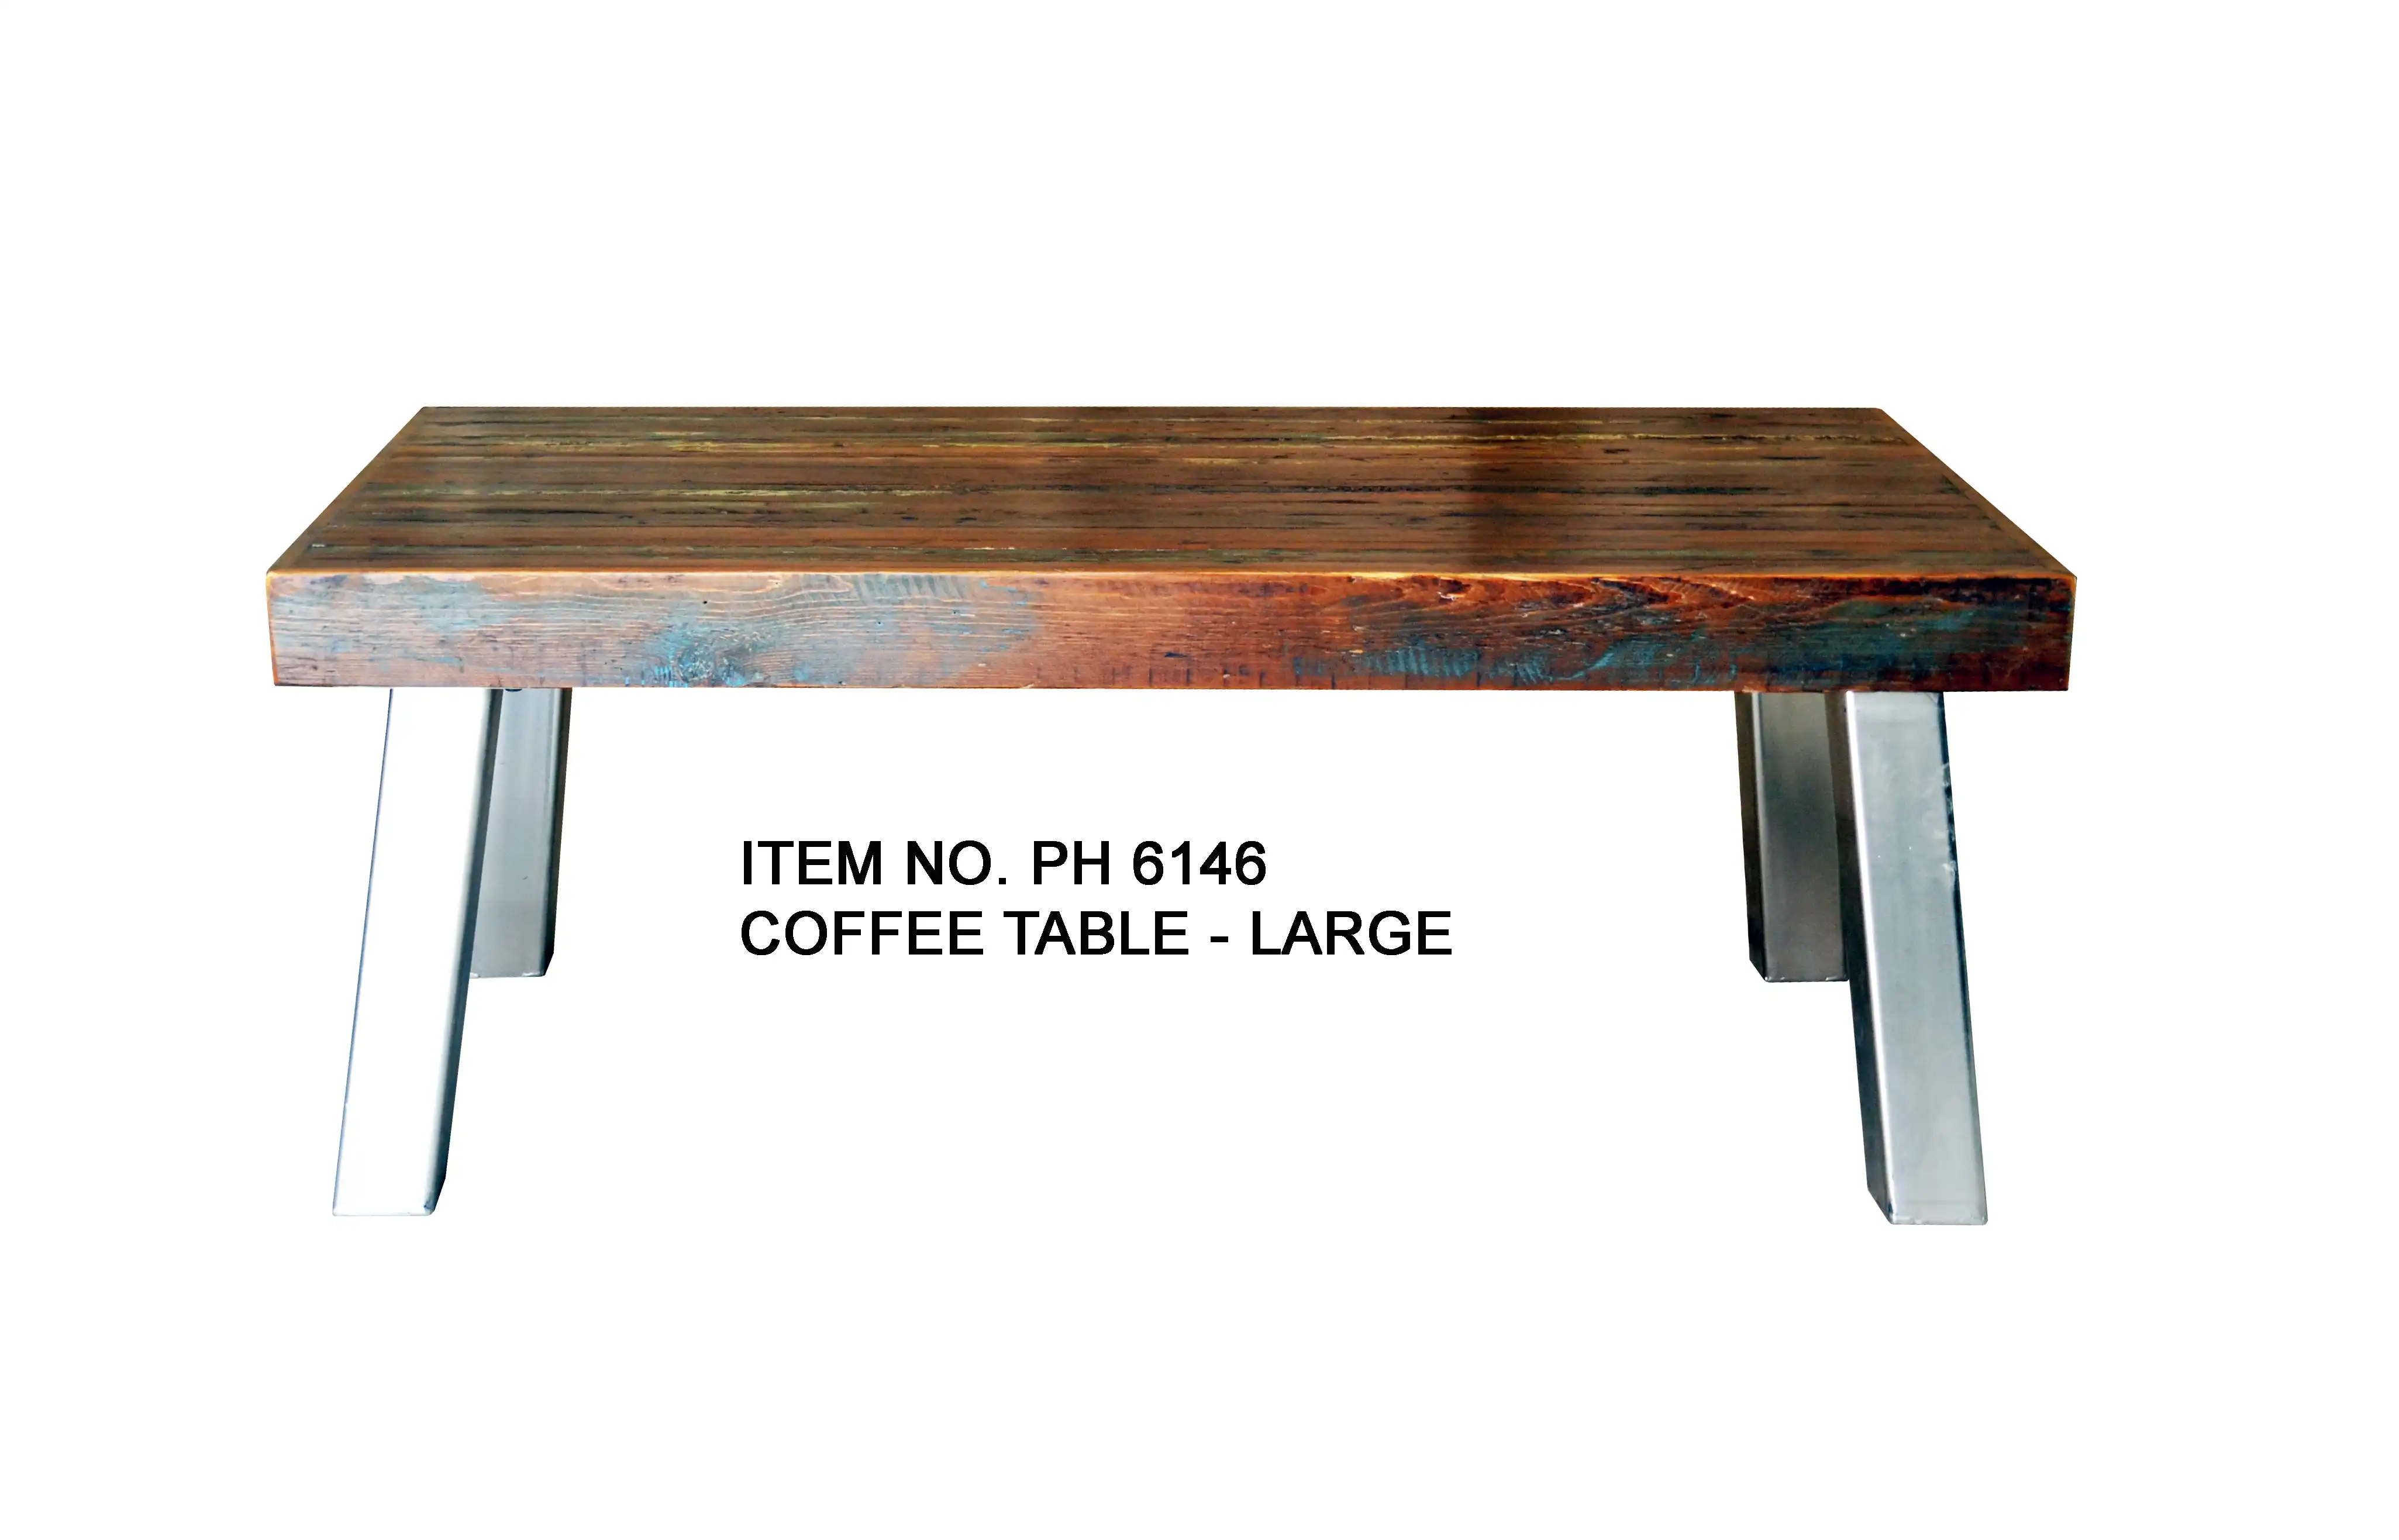 Reclaimed Wood Long Coffee Table with Leg Iron (KD) - popular handicrafts